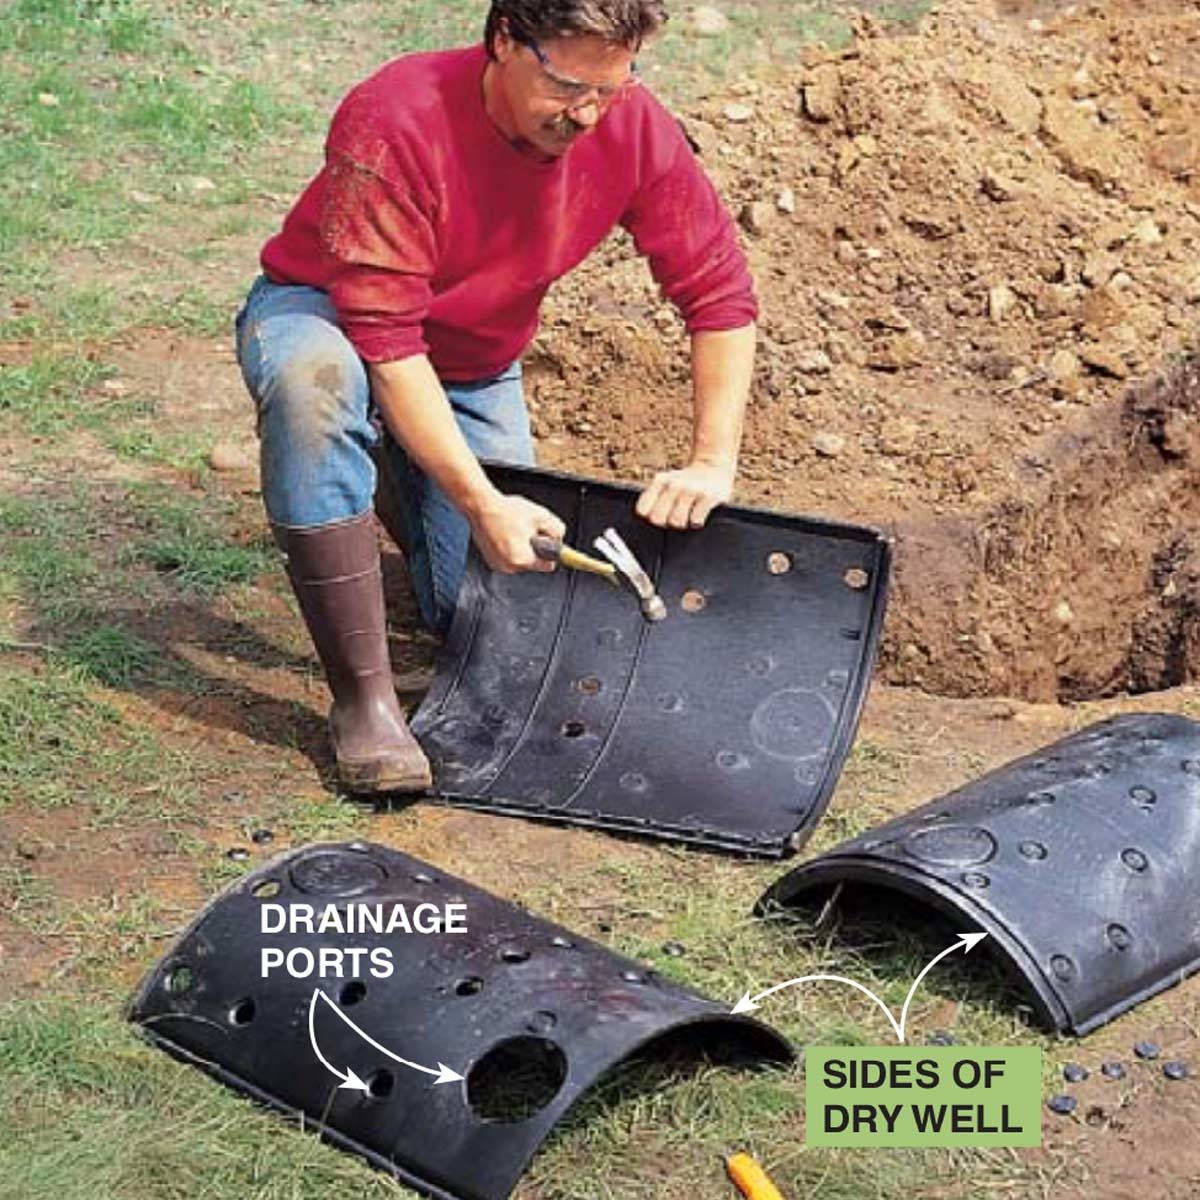 Install an In-Ground Drainage System (DIY) | Family Handyman